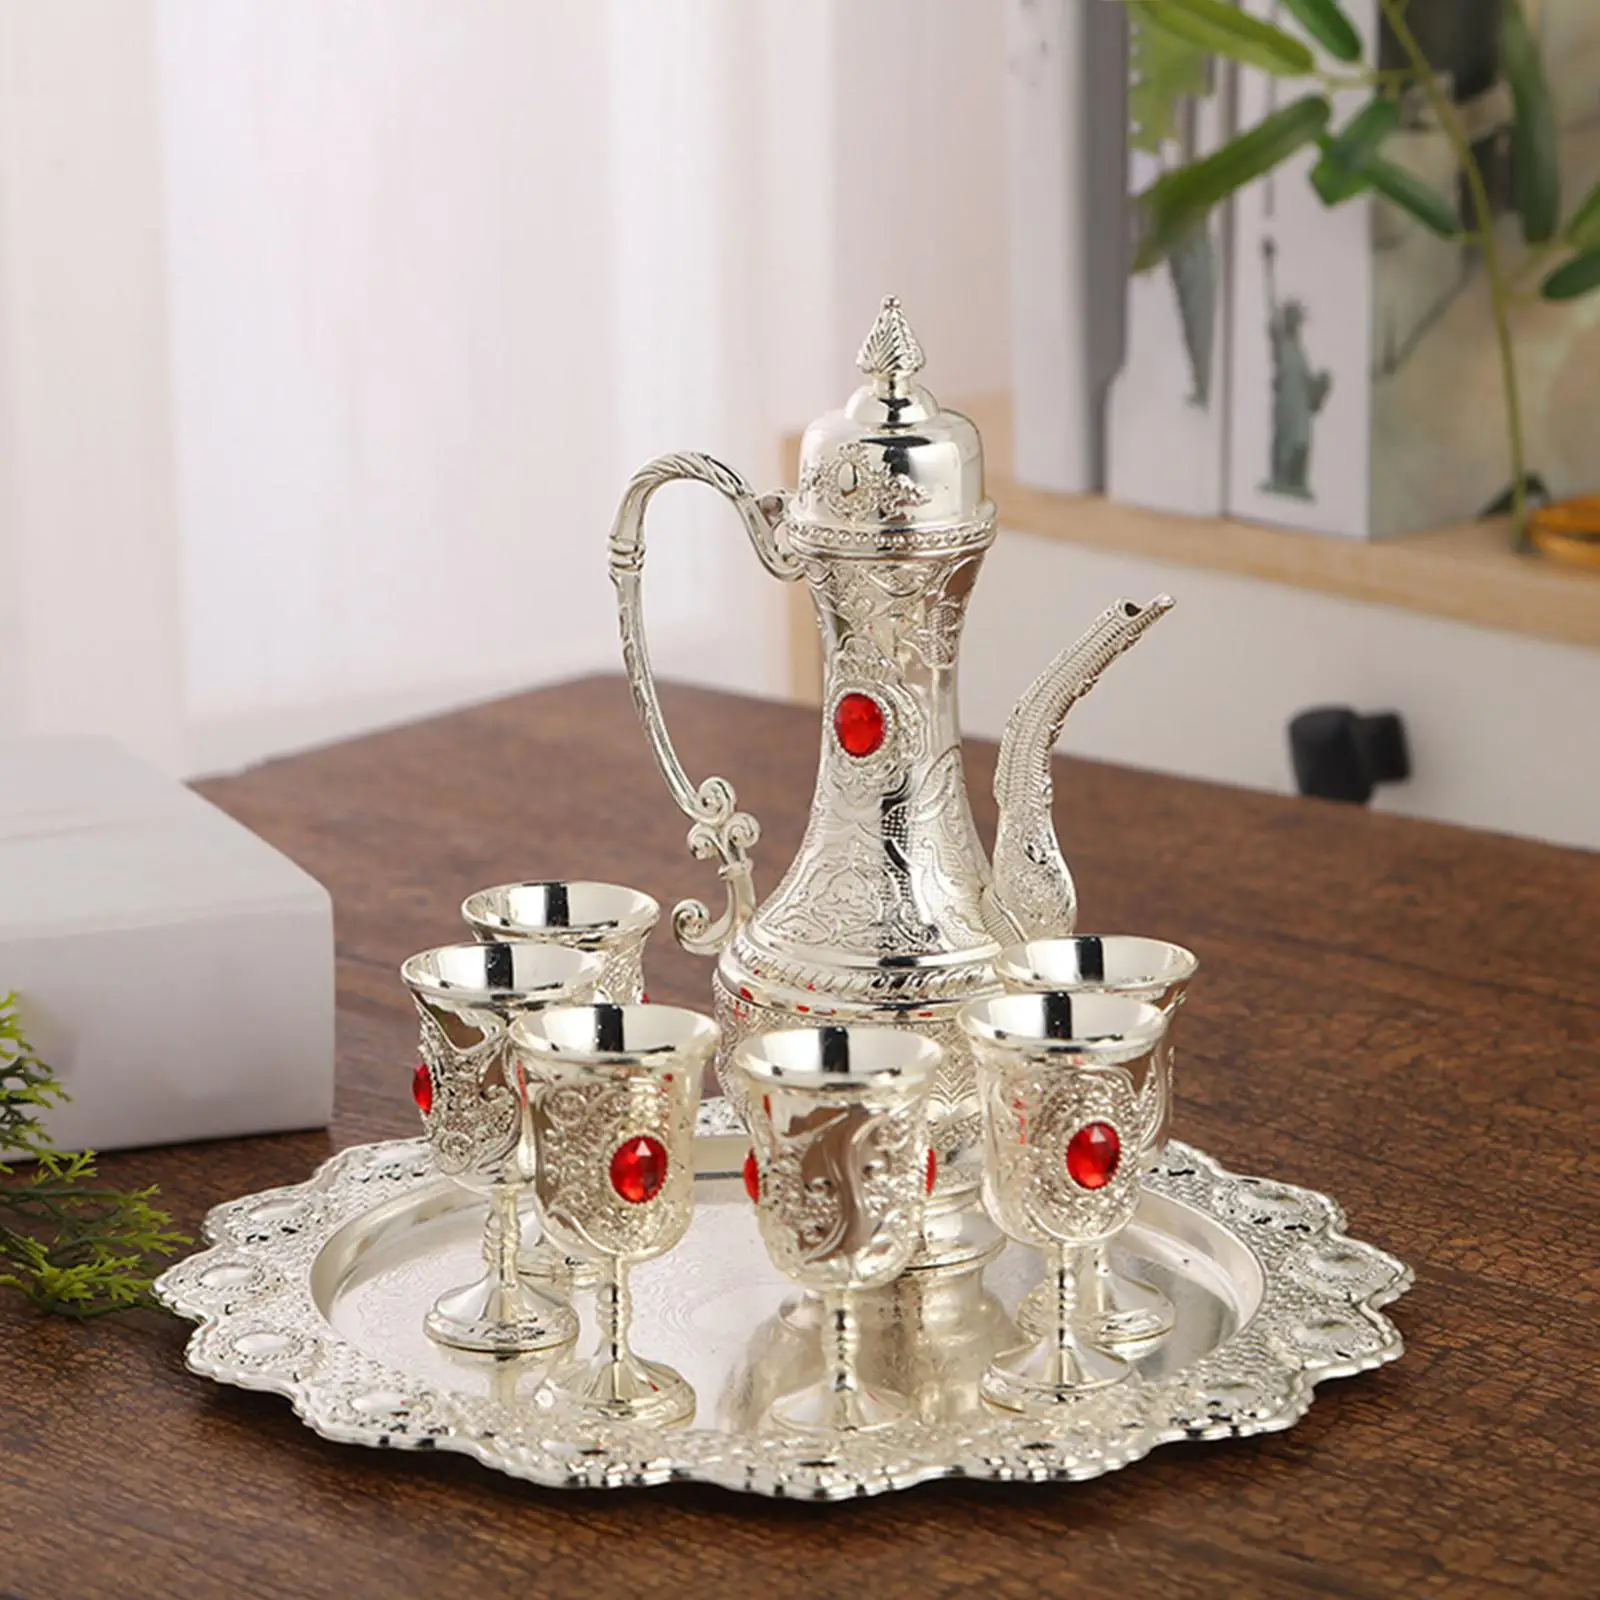 6Pcs Metal Wine Glass Jug Set with Storage Tray Crafts Wine Drinking Cups Hip Flask Set for Table Home Party Holiday Decoration